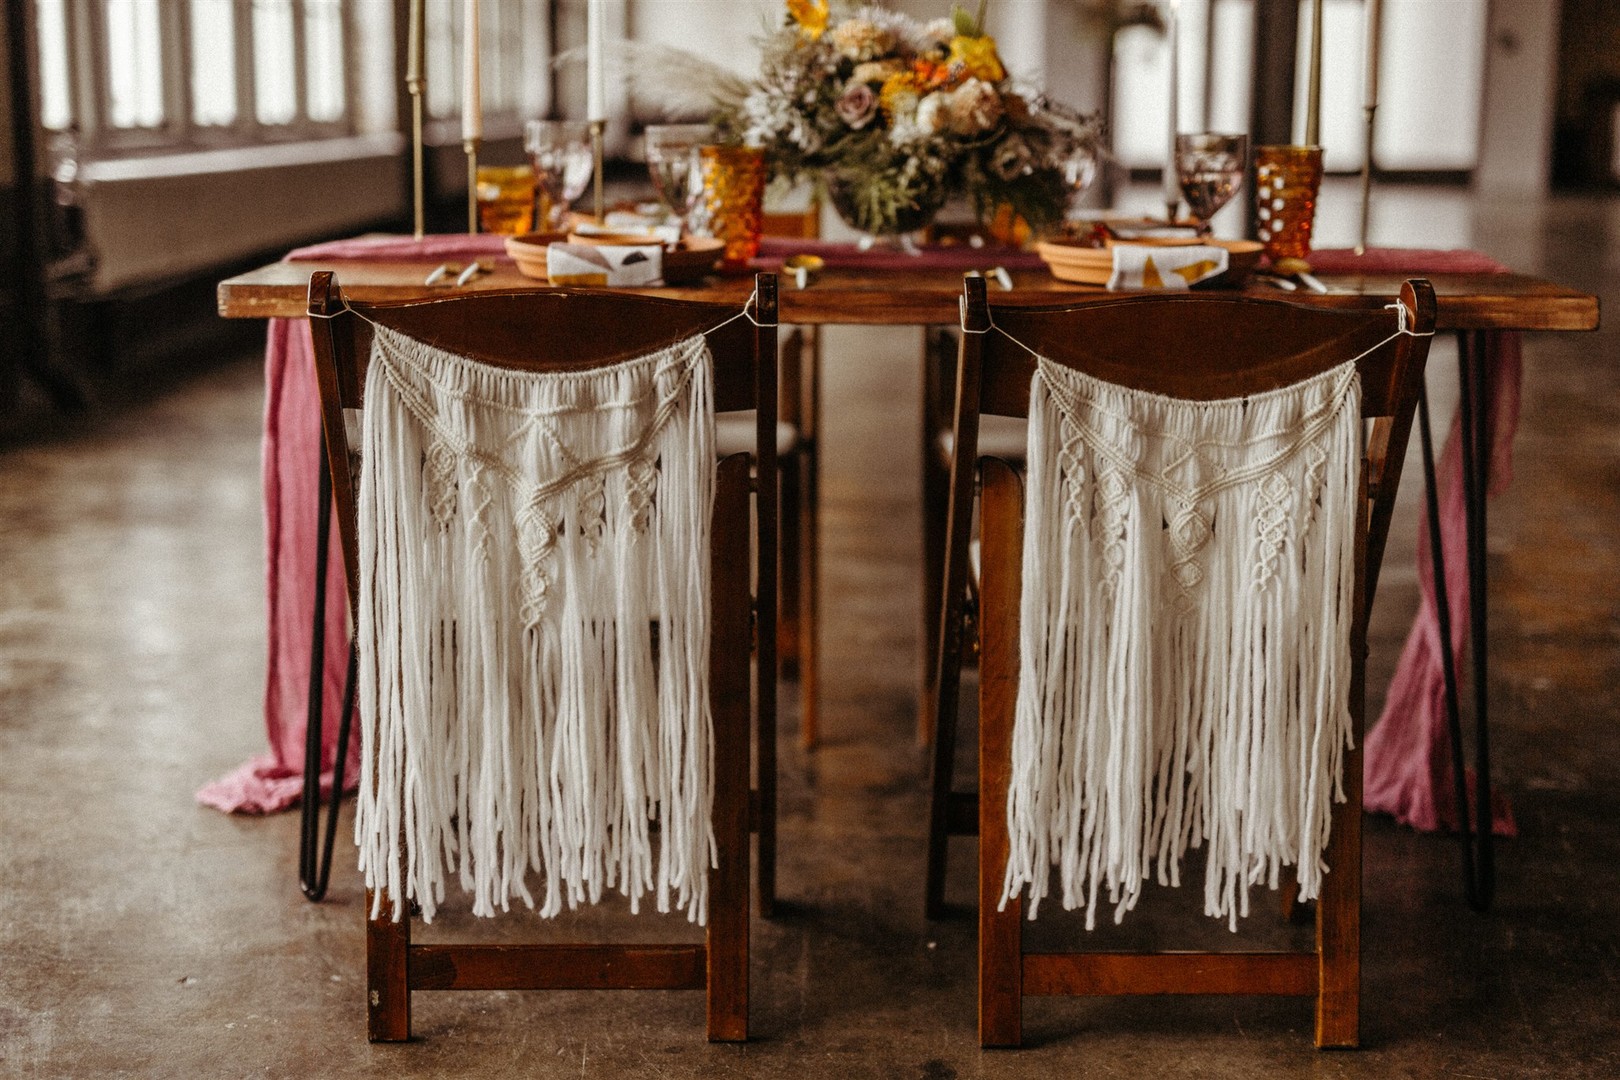 The wedding chairs were decorated with white macrame